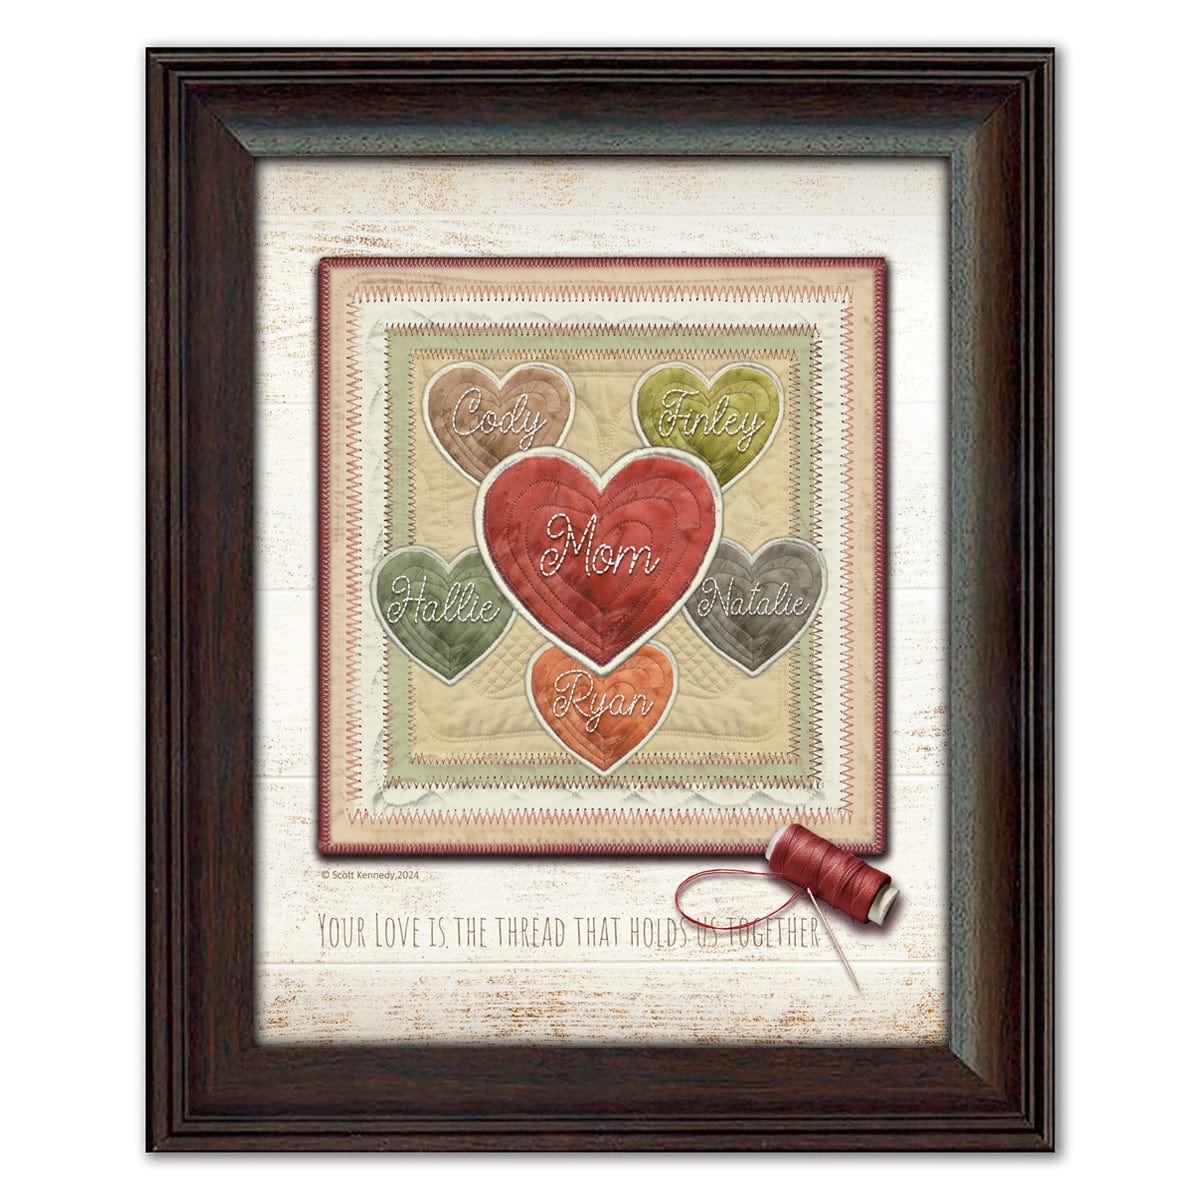 Personalized gift for Mom with Kid's names stitched into the hearts